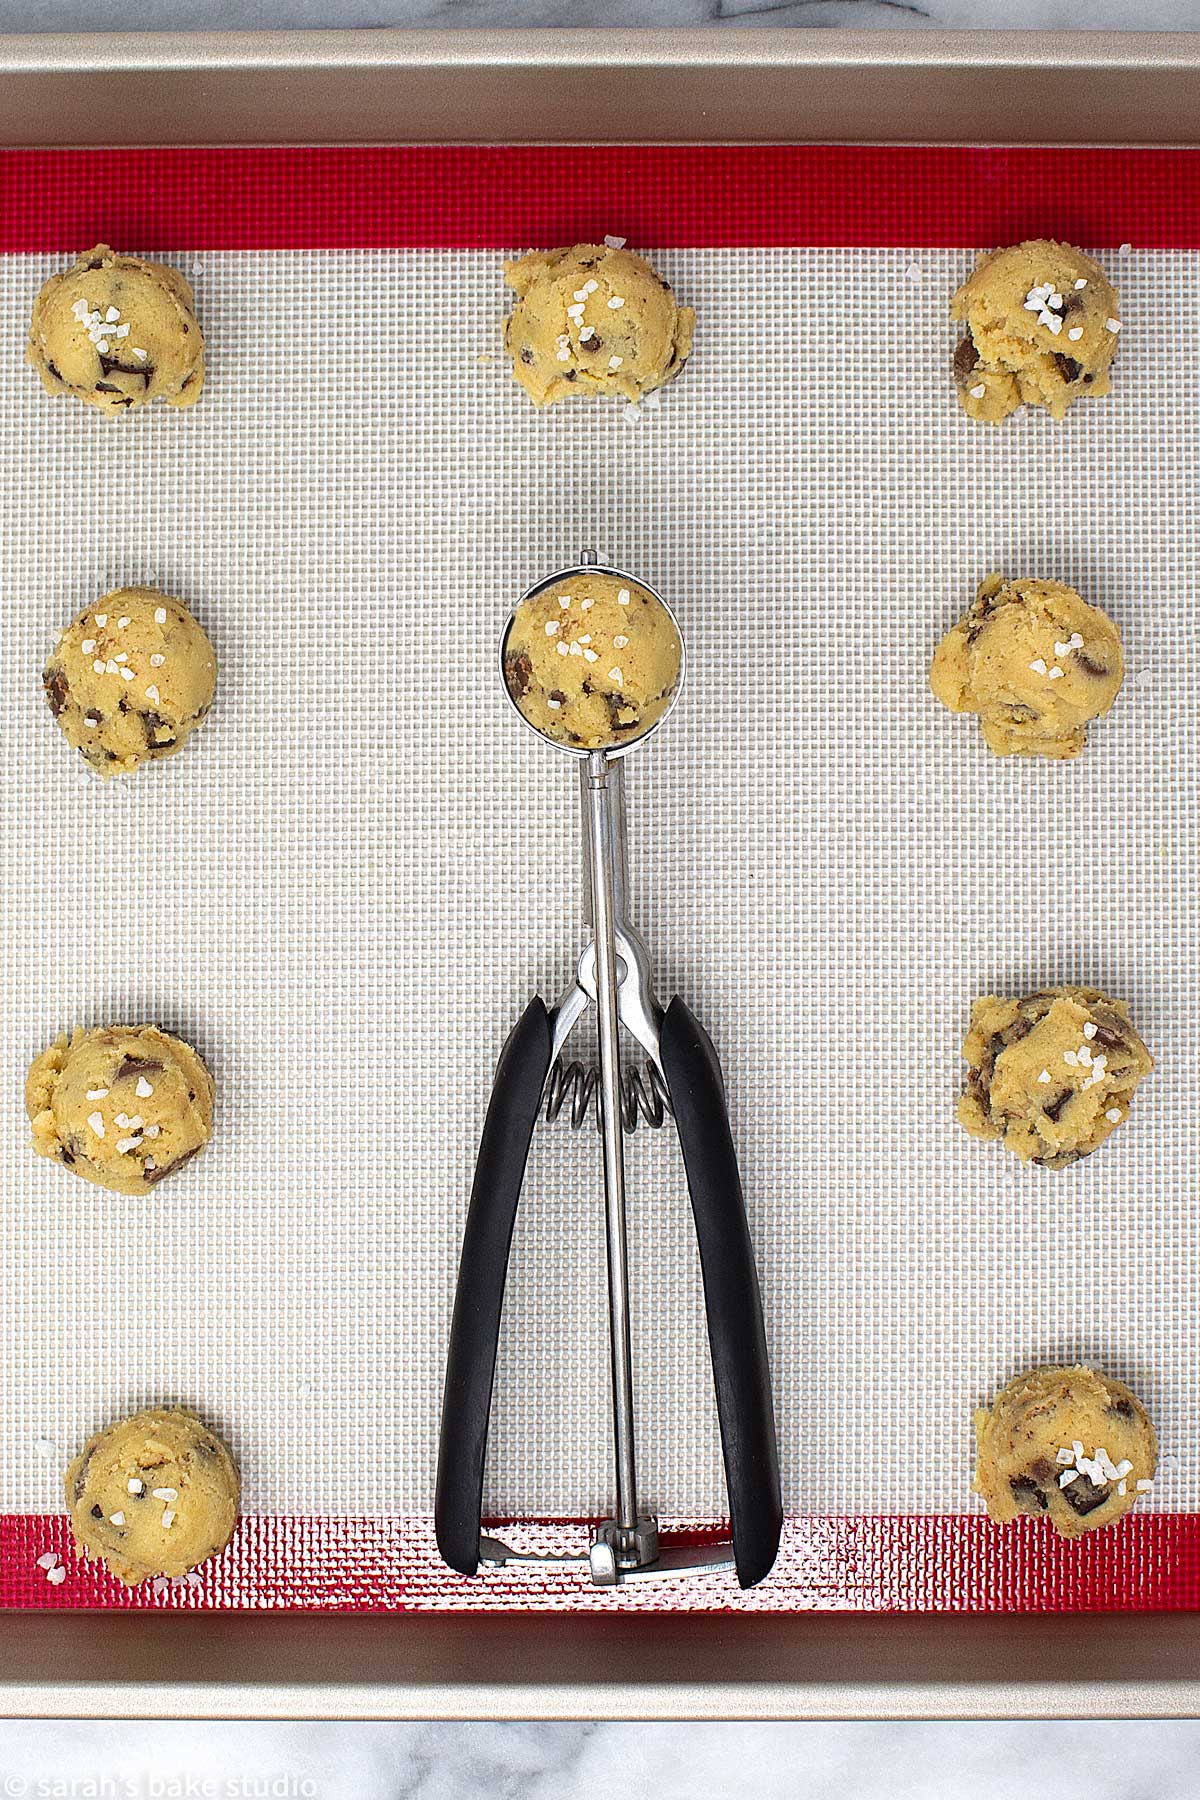 Salted Chocolate Chip Cookies - a delicious sweet and salty twist to soft and chewy chocolate chip cookies with the addition of both milk and dark chocolate chips and sea salt. #OXOBetter #OXOGoodCookies